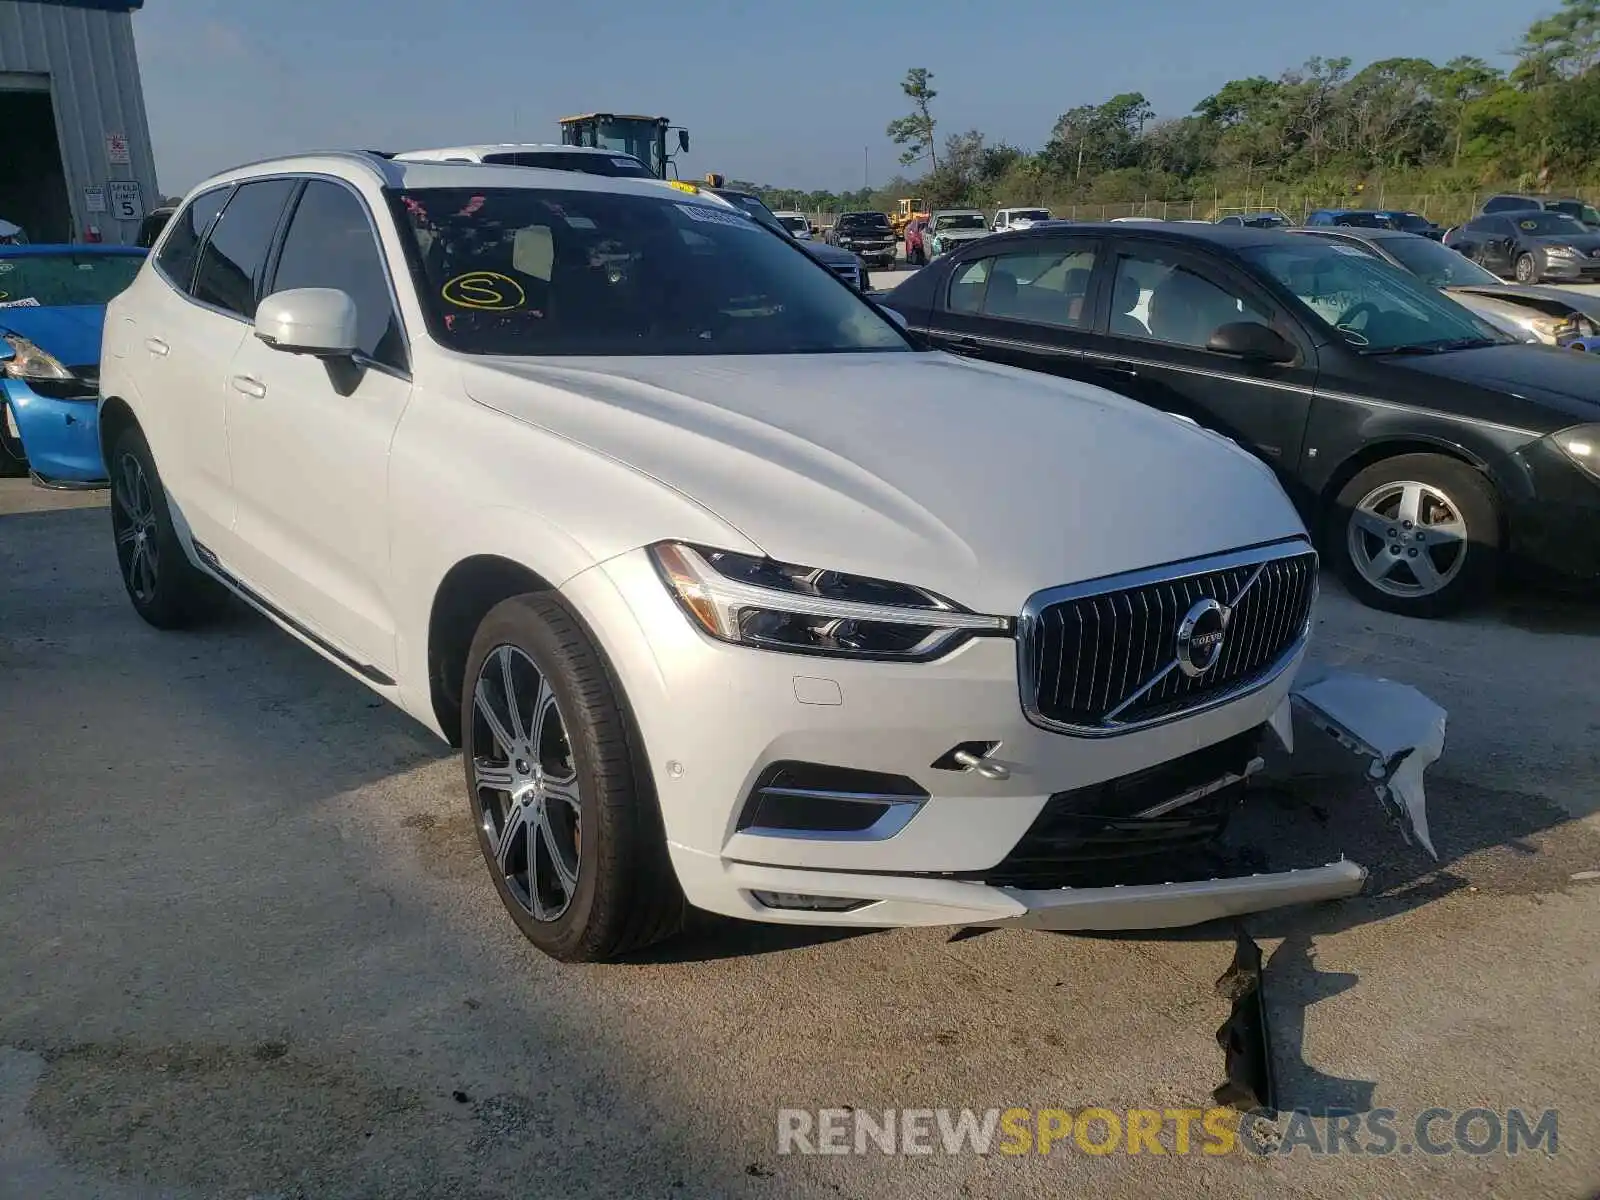 1 Photograph of a damaged car YV4102DL3L1491194 VOLVO XC60 T5 IN 2020